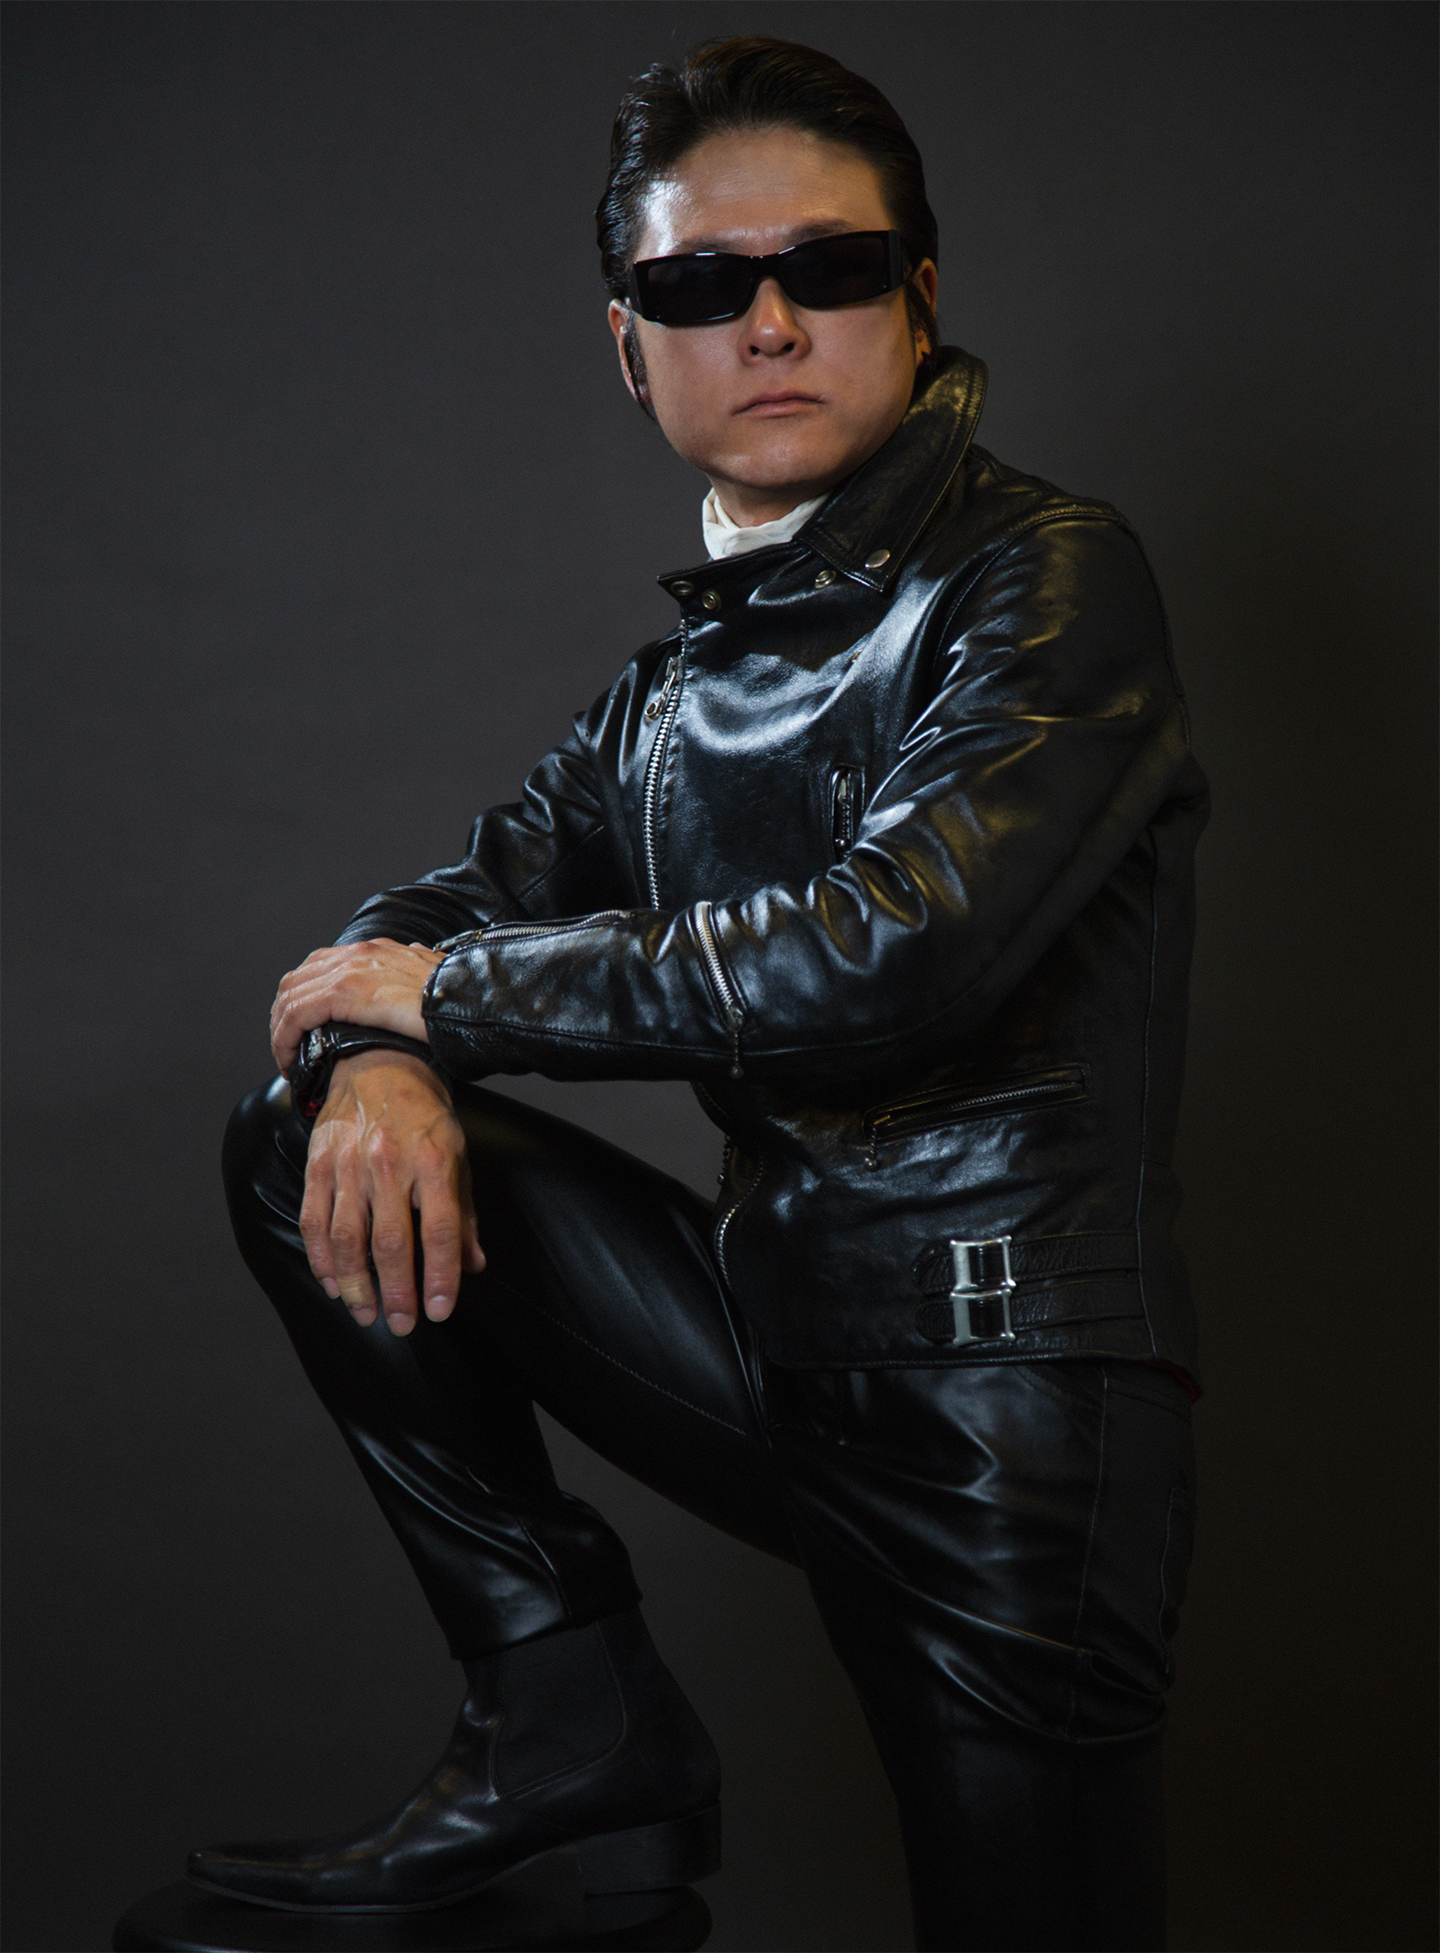 Kaoru wears British-inspired leathers by the Japanese brand 666